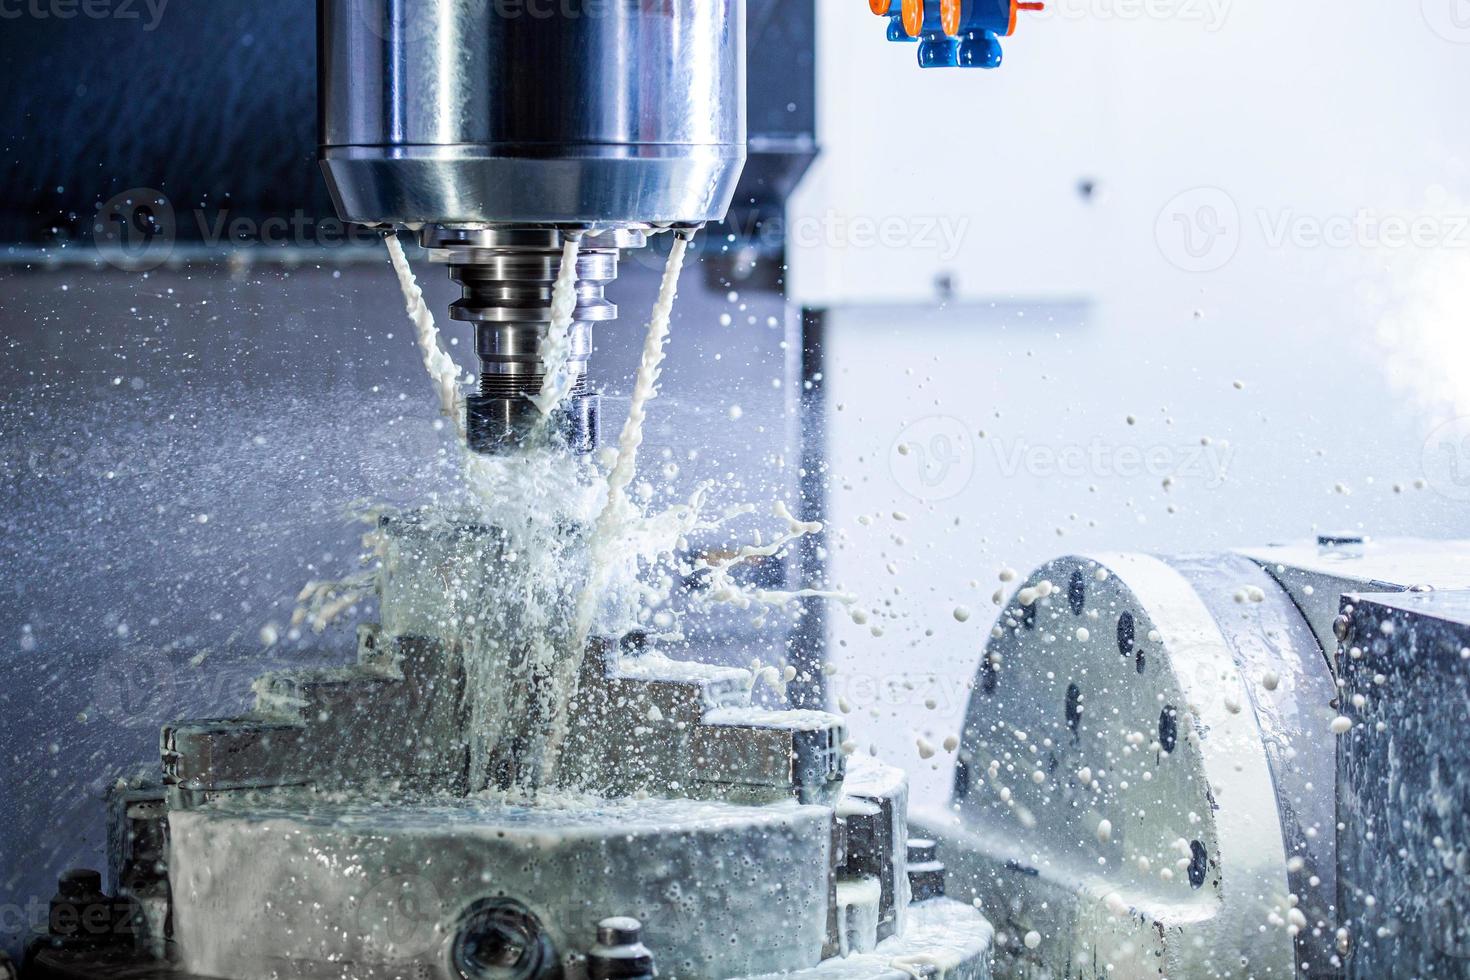 a process of industrial wet milling in 5-axis cnc machine with coolant flow under pressure and freezed splashes photo